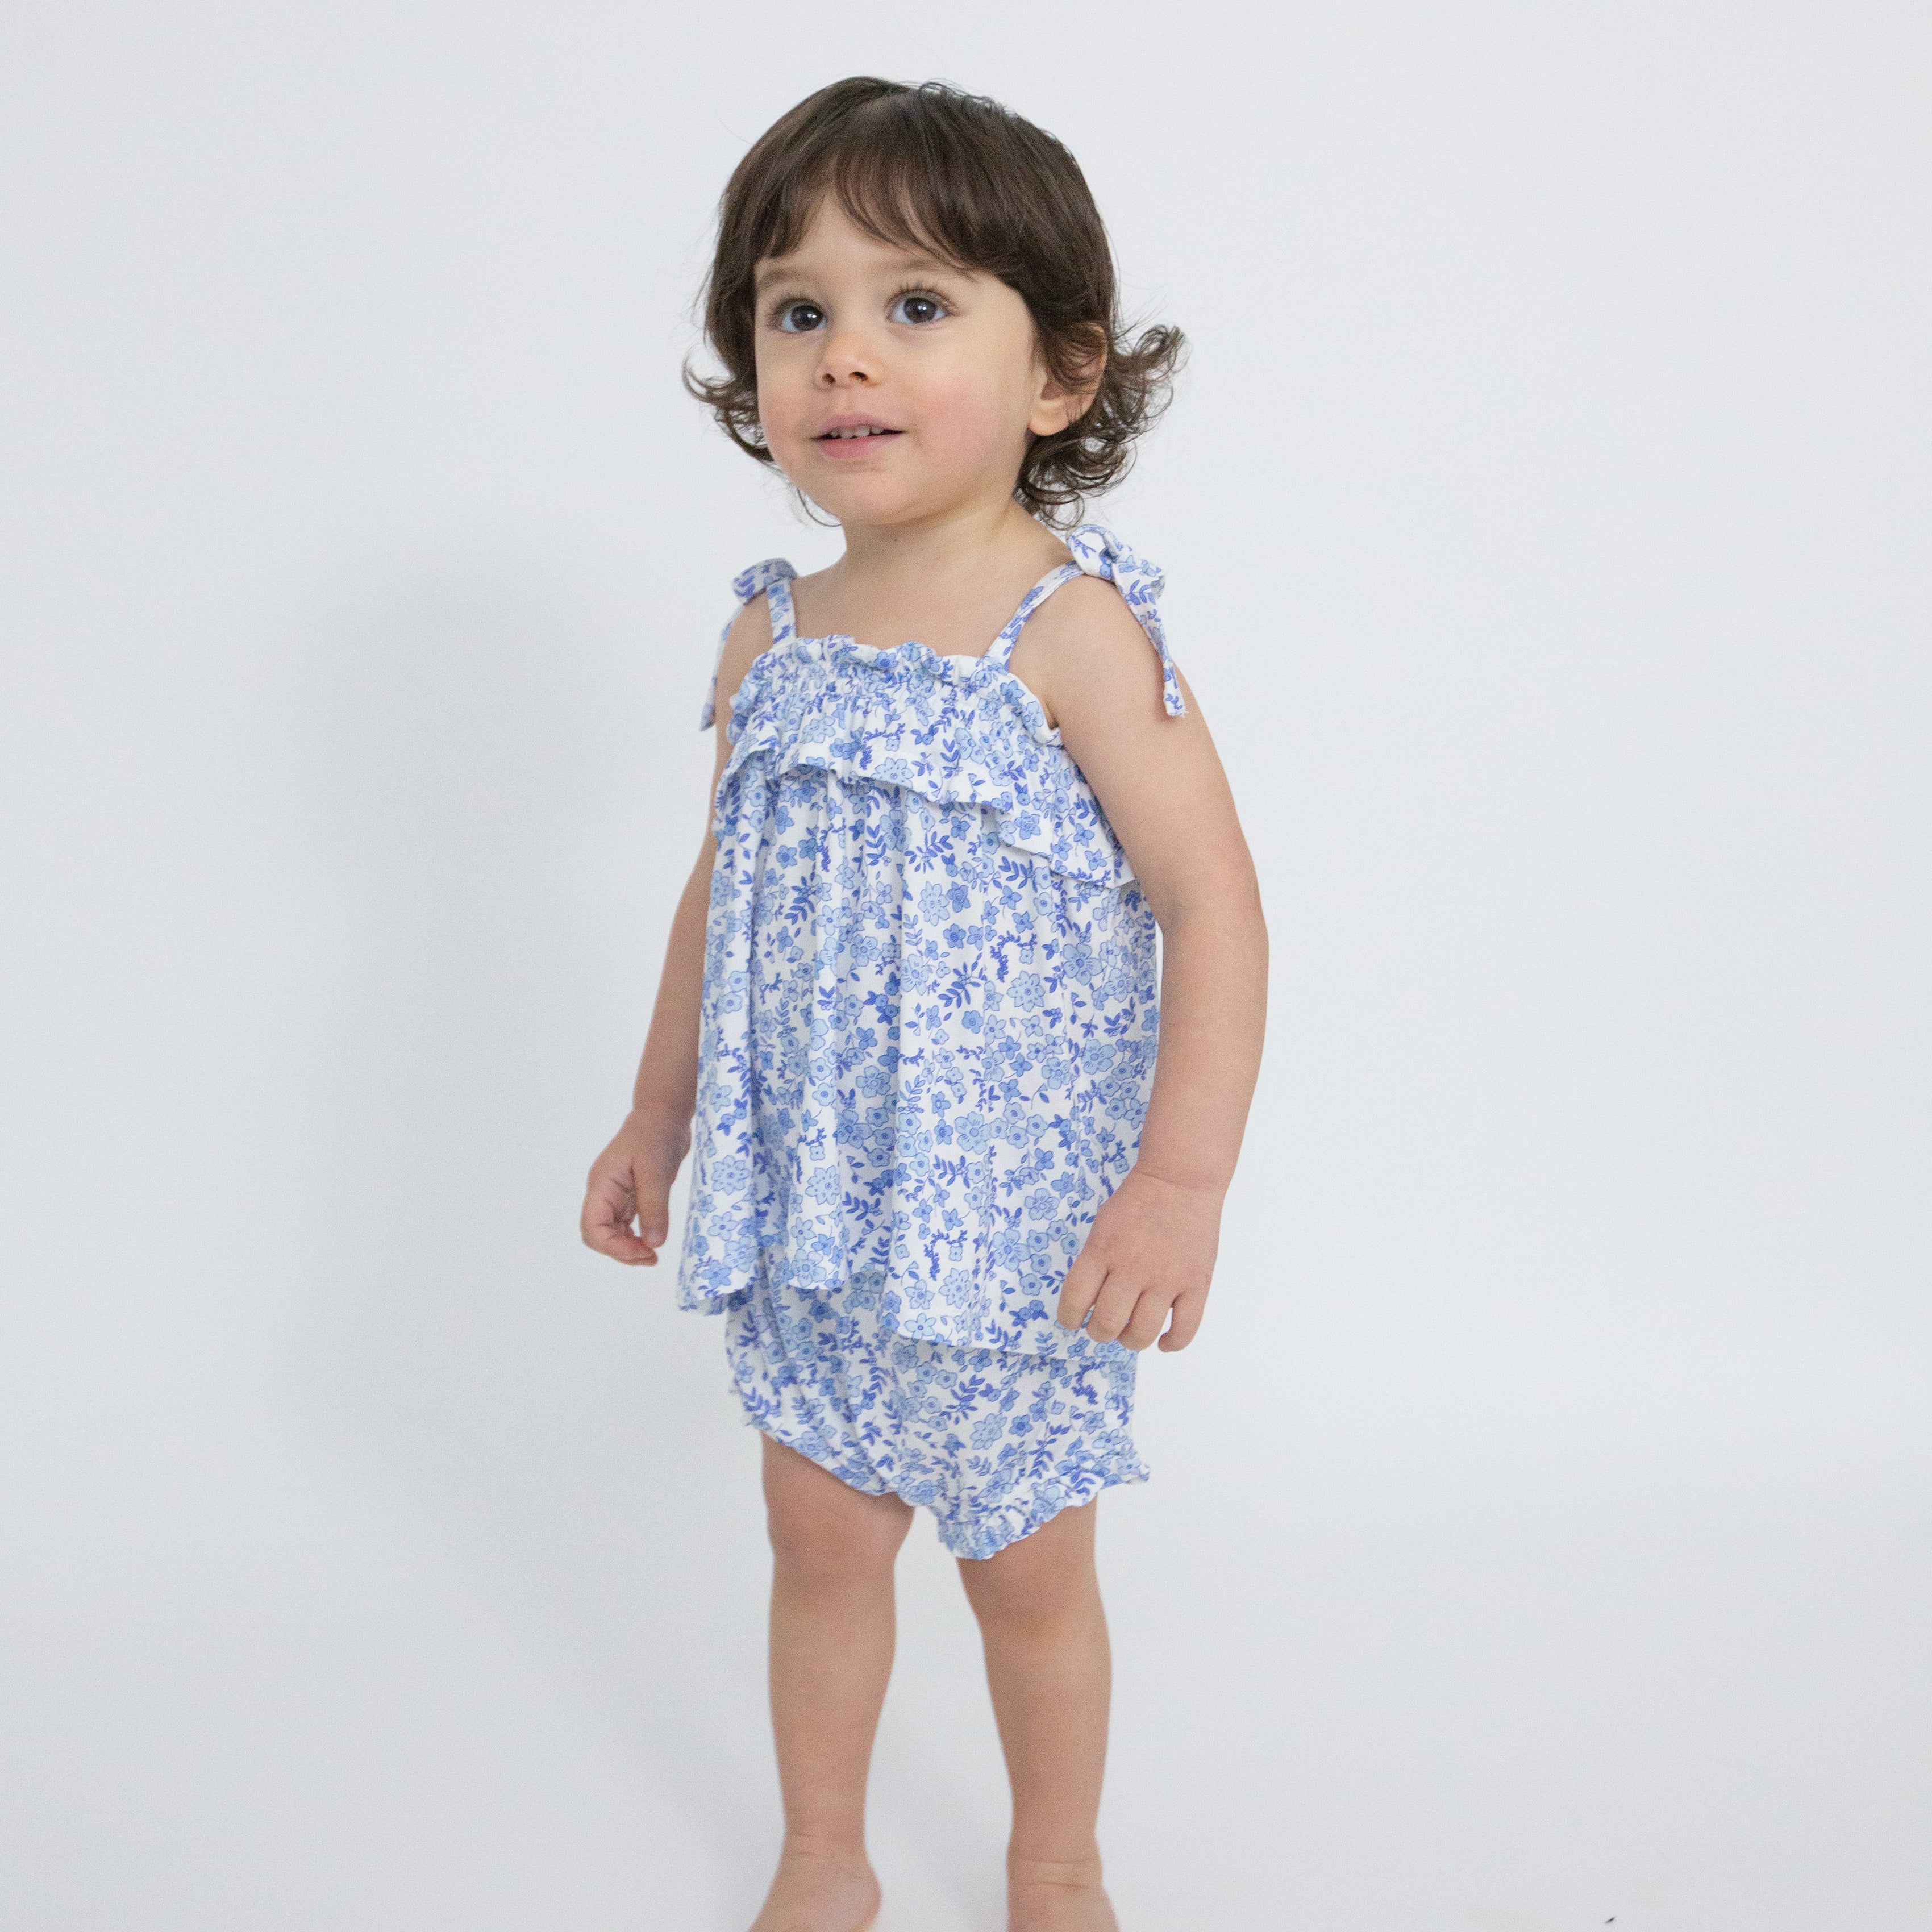 Ruffle Top & Bloomer - Blue Calico Floral